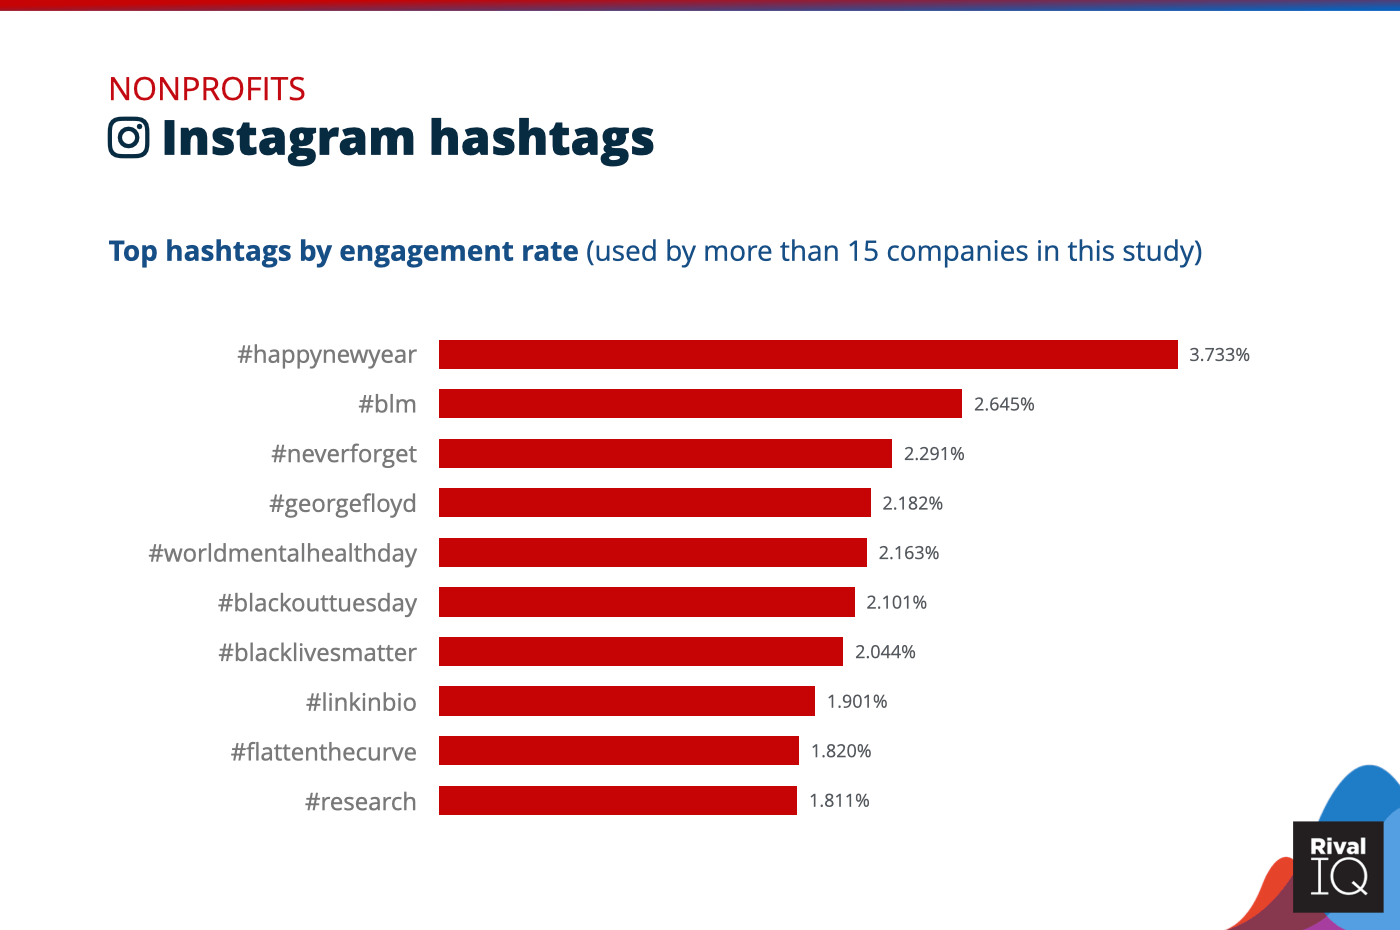 Chart of Top Instagram hashtags by engagement rate, Nonprofits